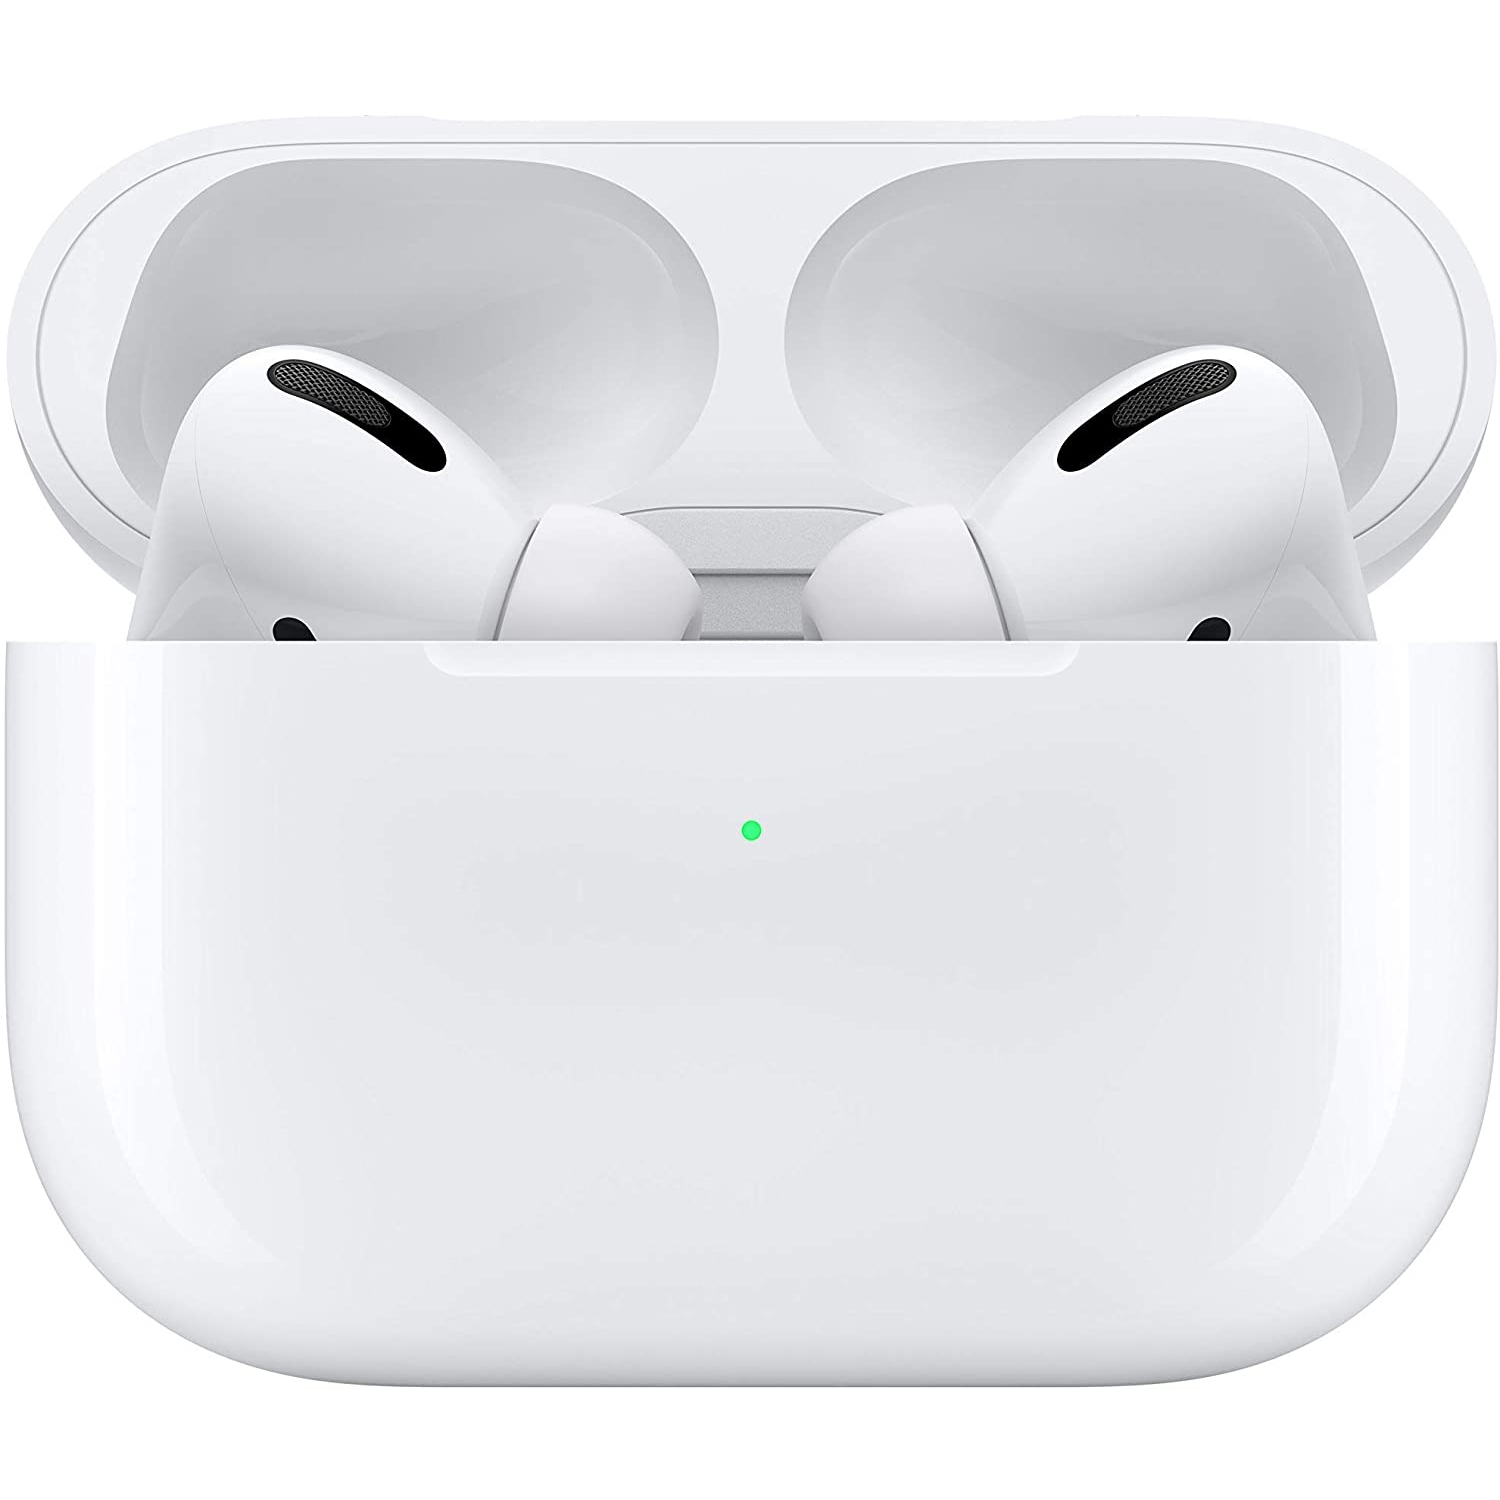 Apple - AirPods Pro - In-Ear - Noise Cancelling Wireless Headphones - with MagSafe Charging Case - Brand New - Sealed - White